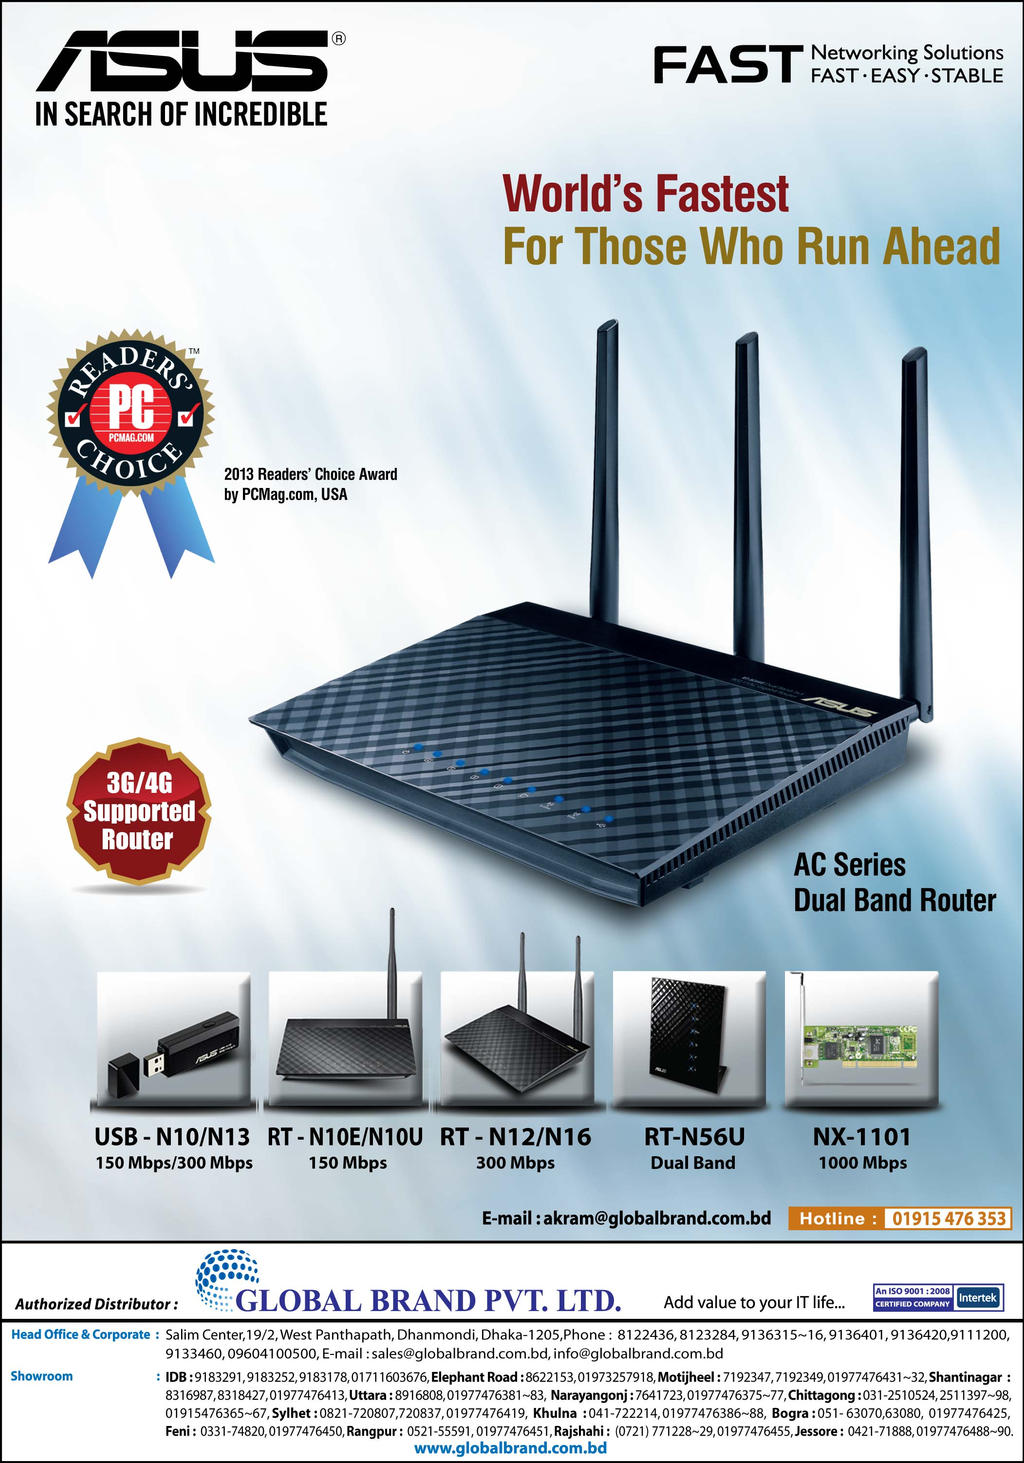 ASUS Router Ad by Jabedoppsdesign on